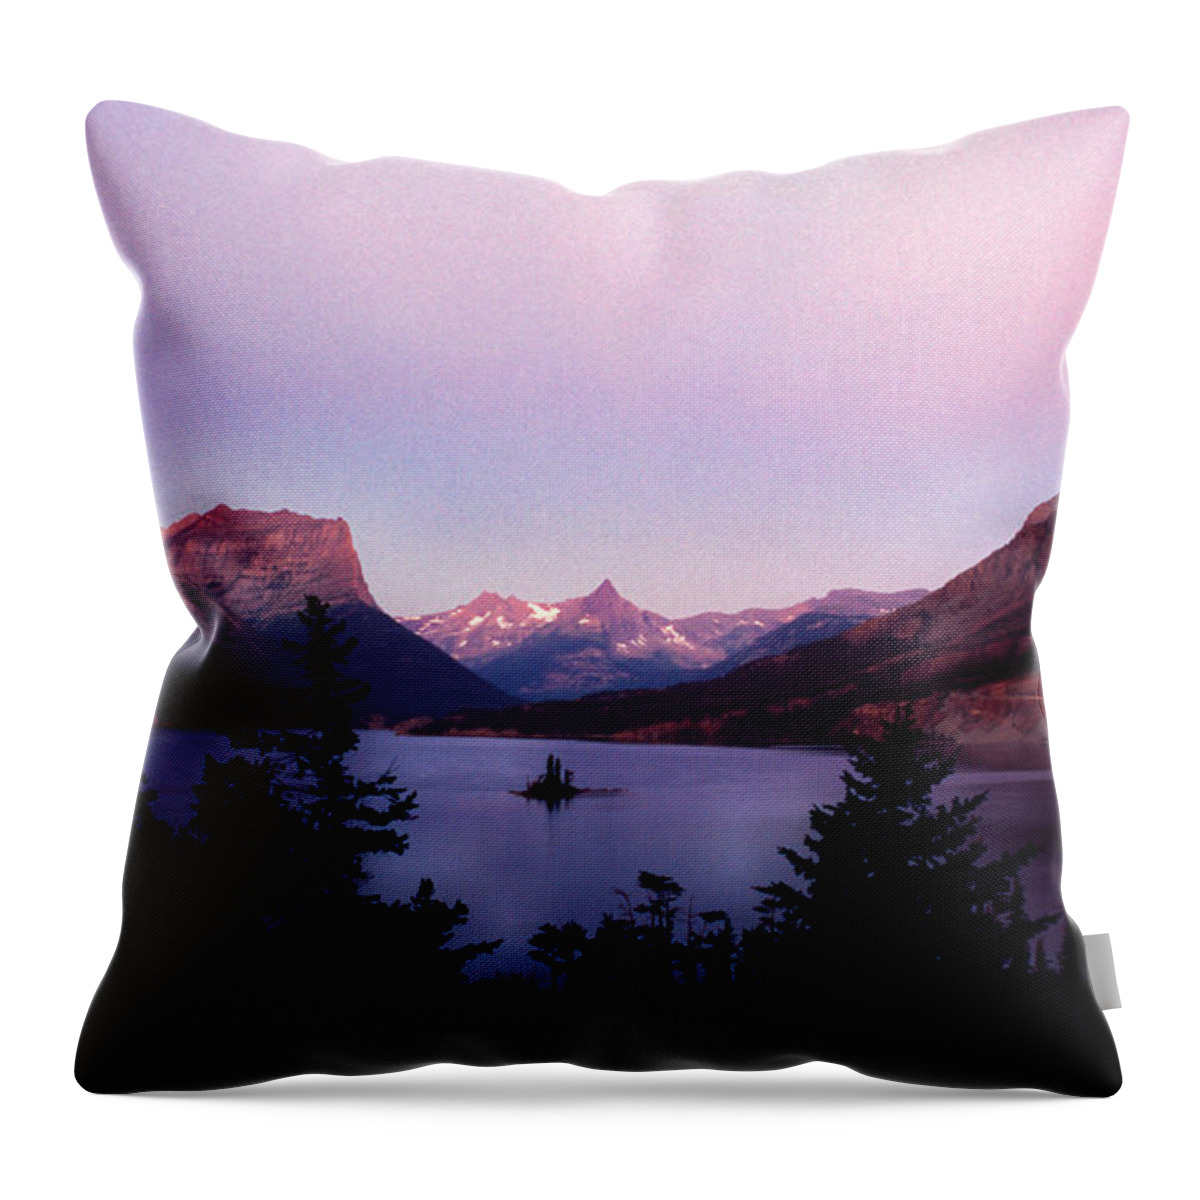 Glacier Throw Pillow featuring the photograph Wild Goose Island by Denise Dethlefsen